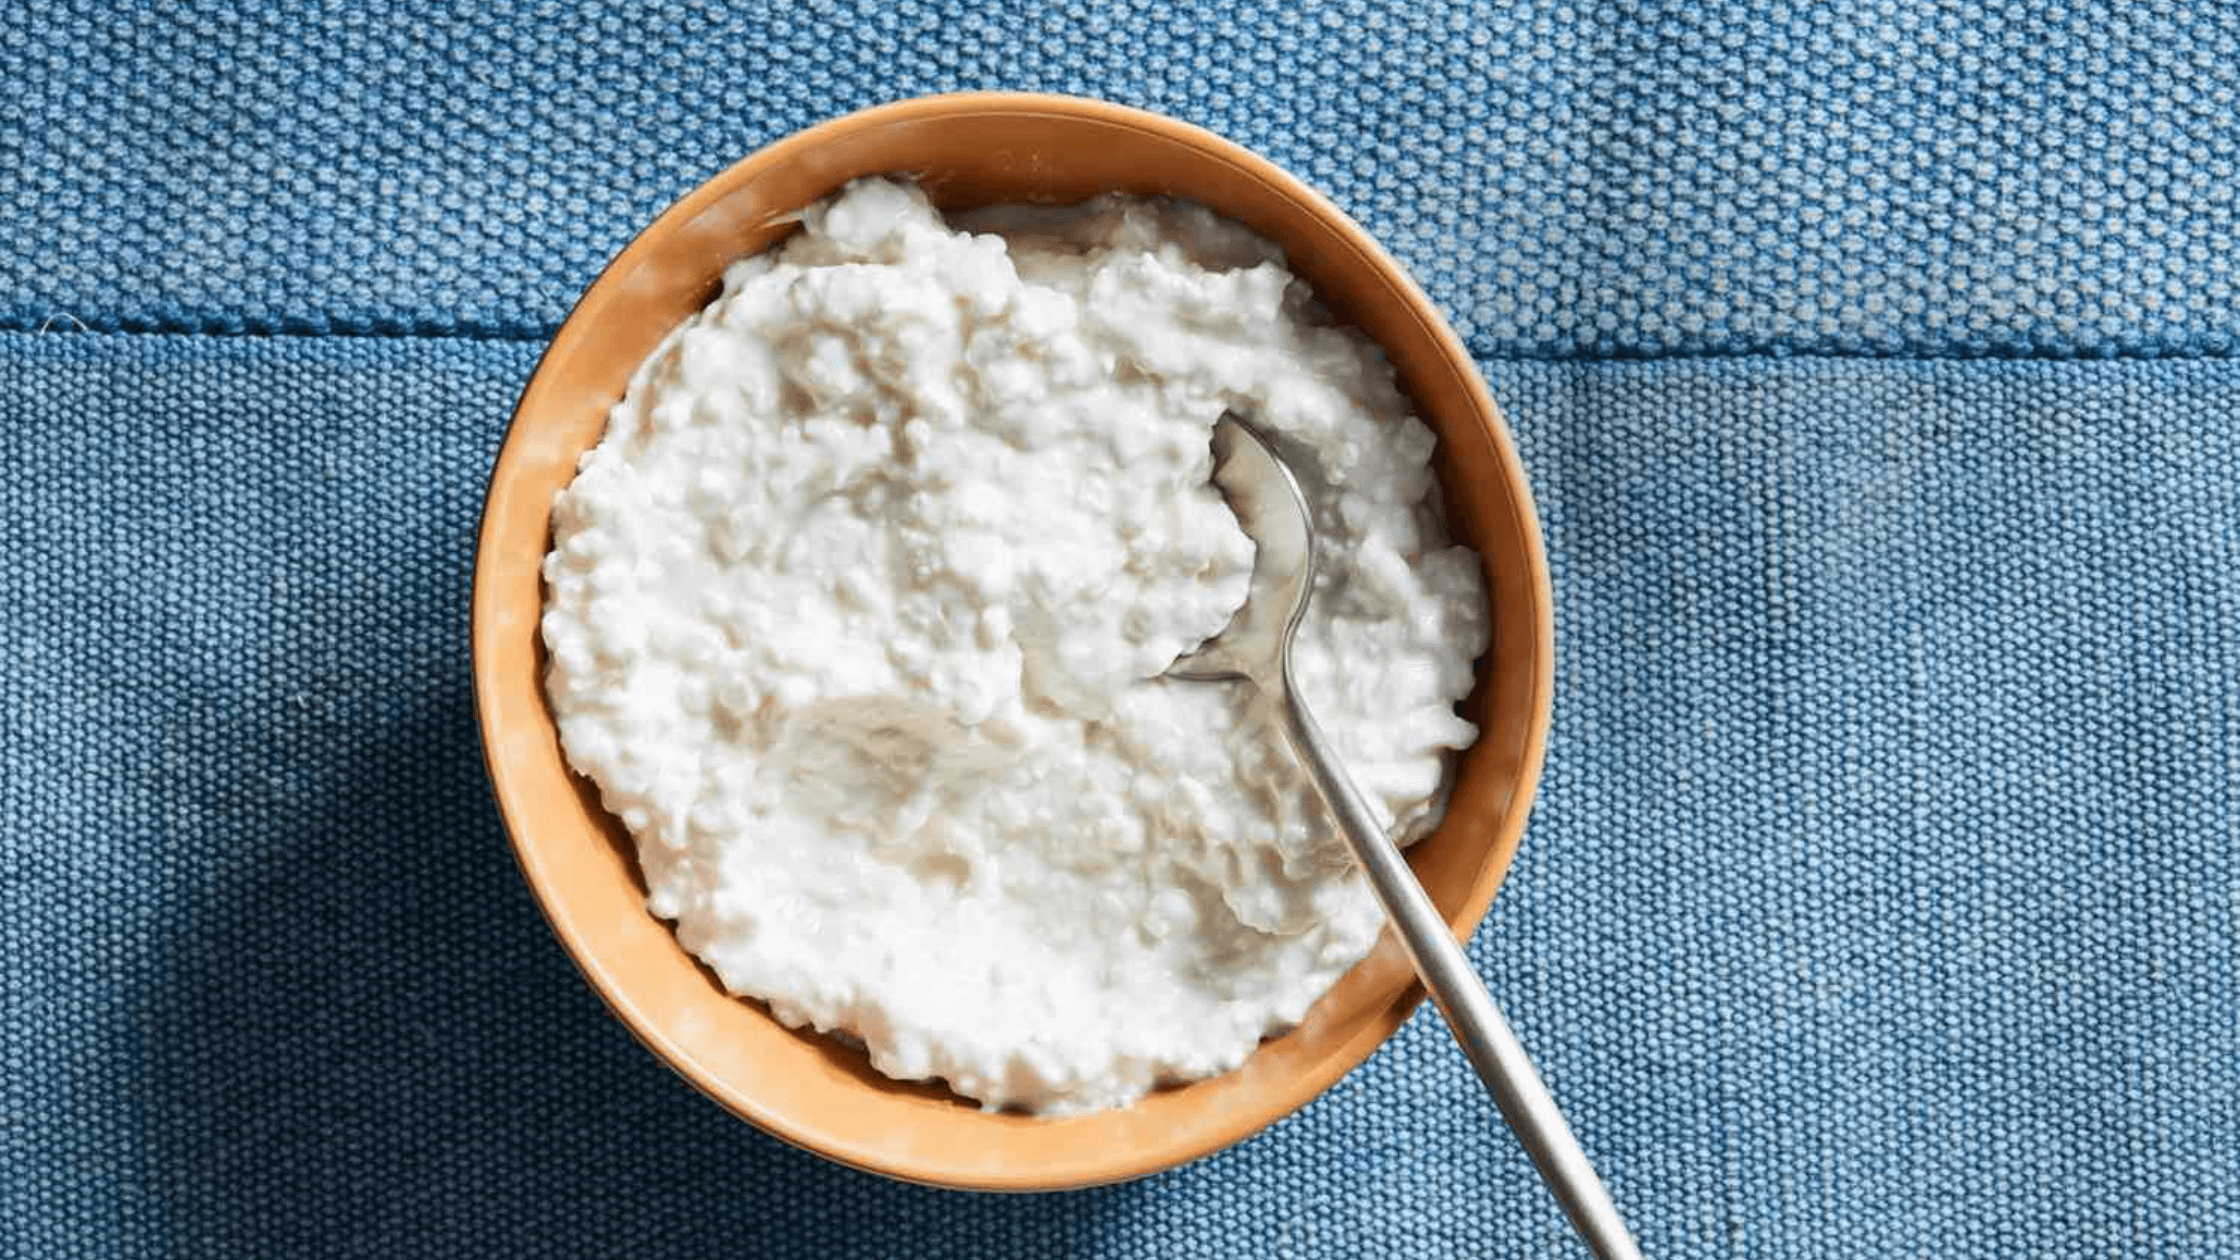 Some Favorite Ways To Eat Cottage Cheese!